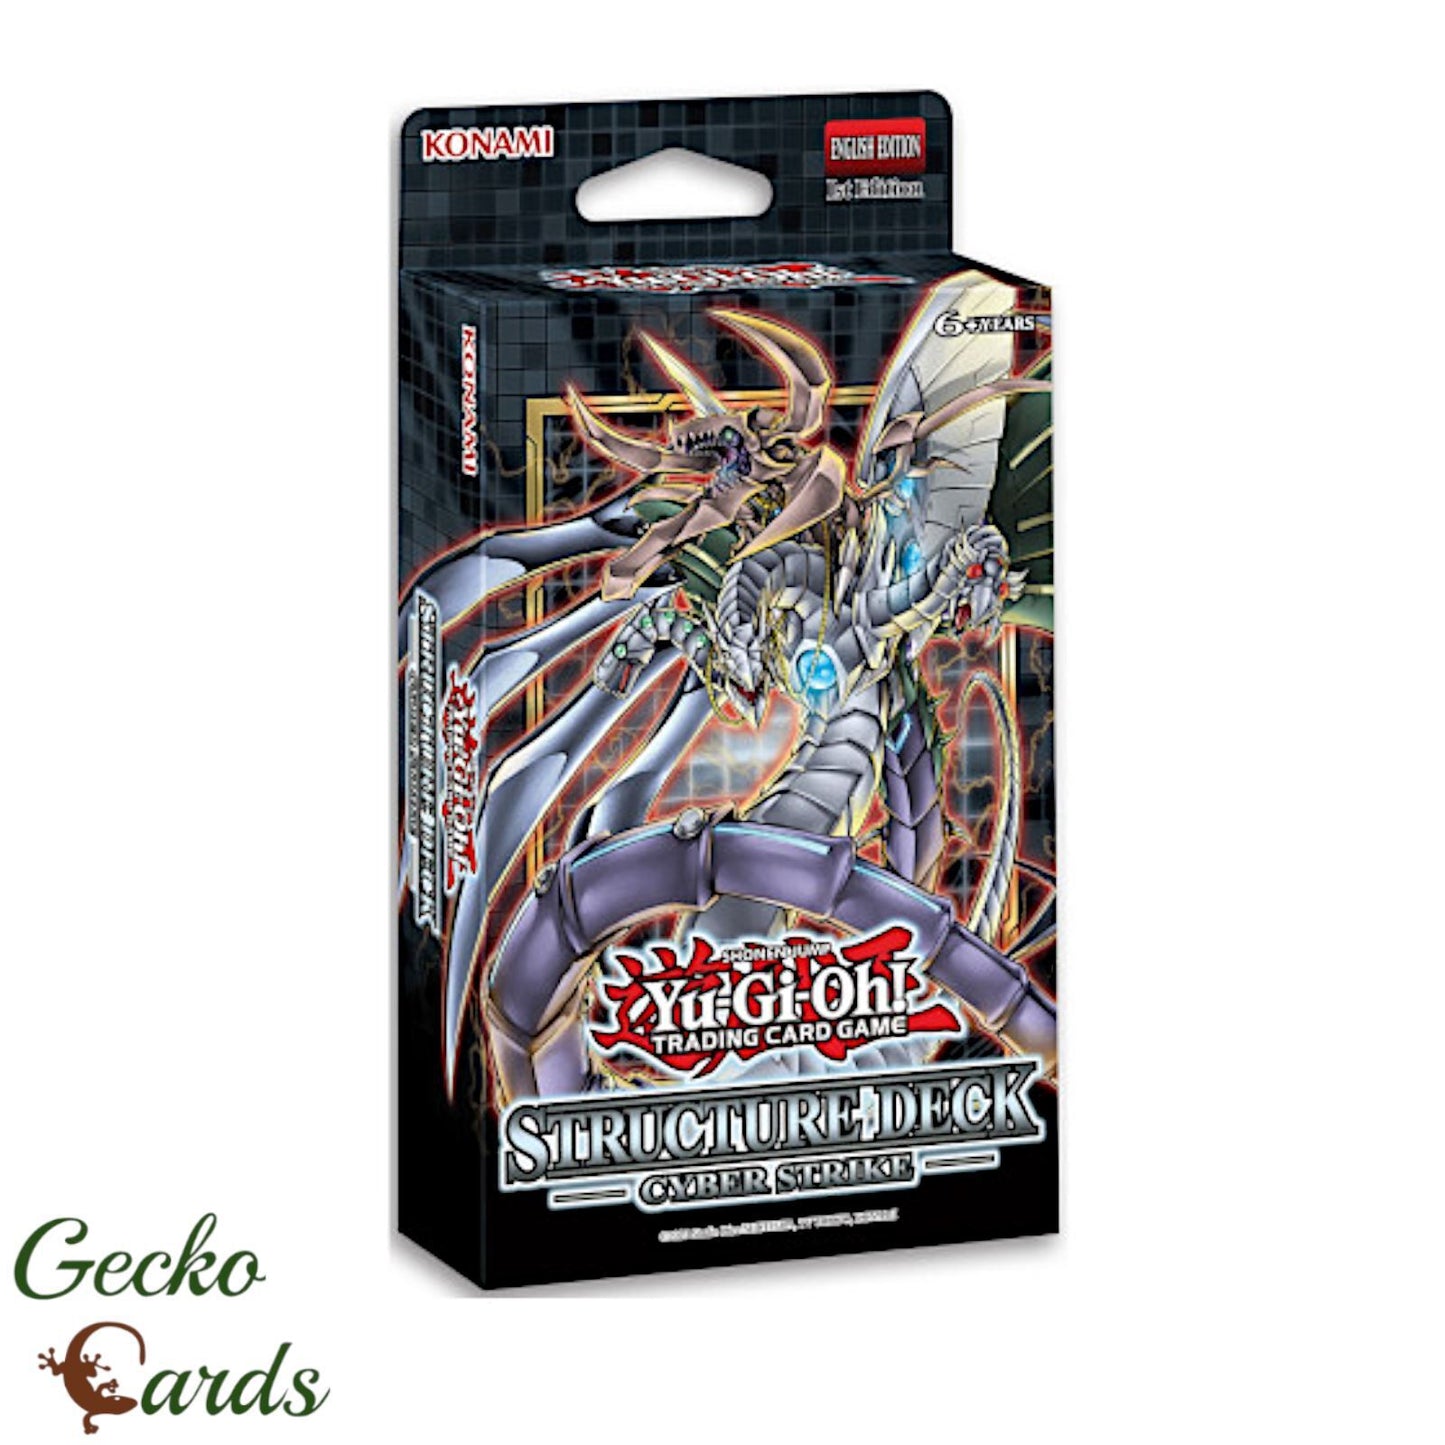 Yu-Gi-Oh! - Cyber Strike Structure Deck Reprint Unlimited Edition